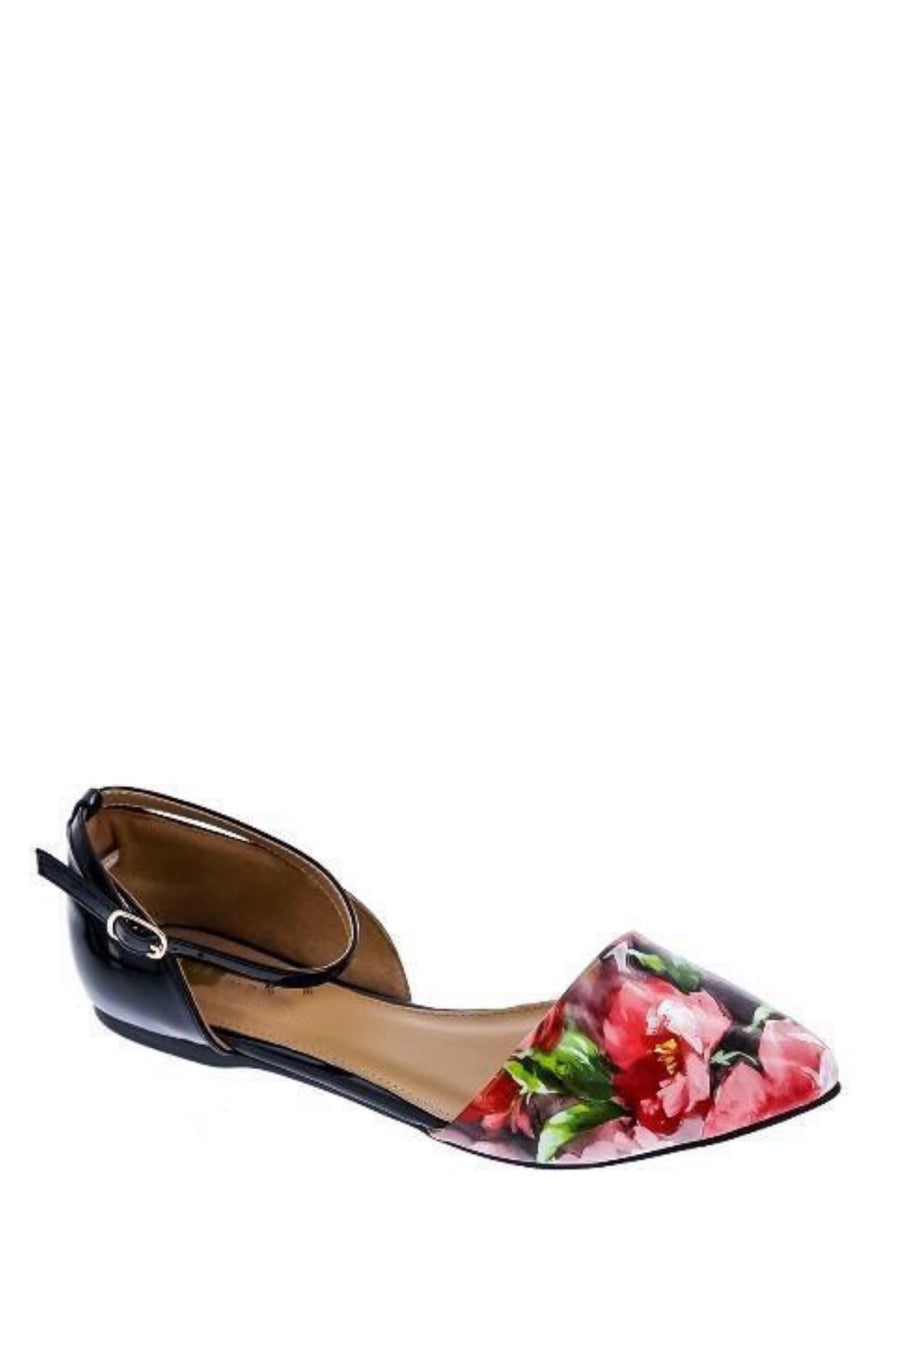 NF-Spru, Pointed Floral Flats - Dimesi Boutique